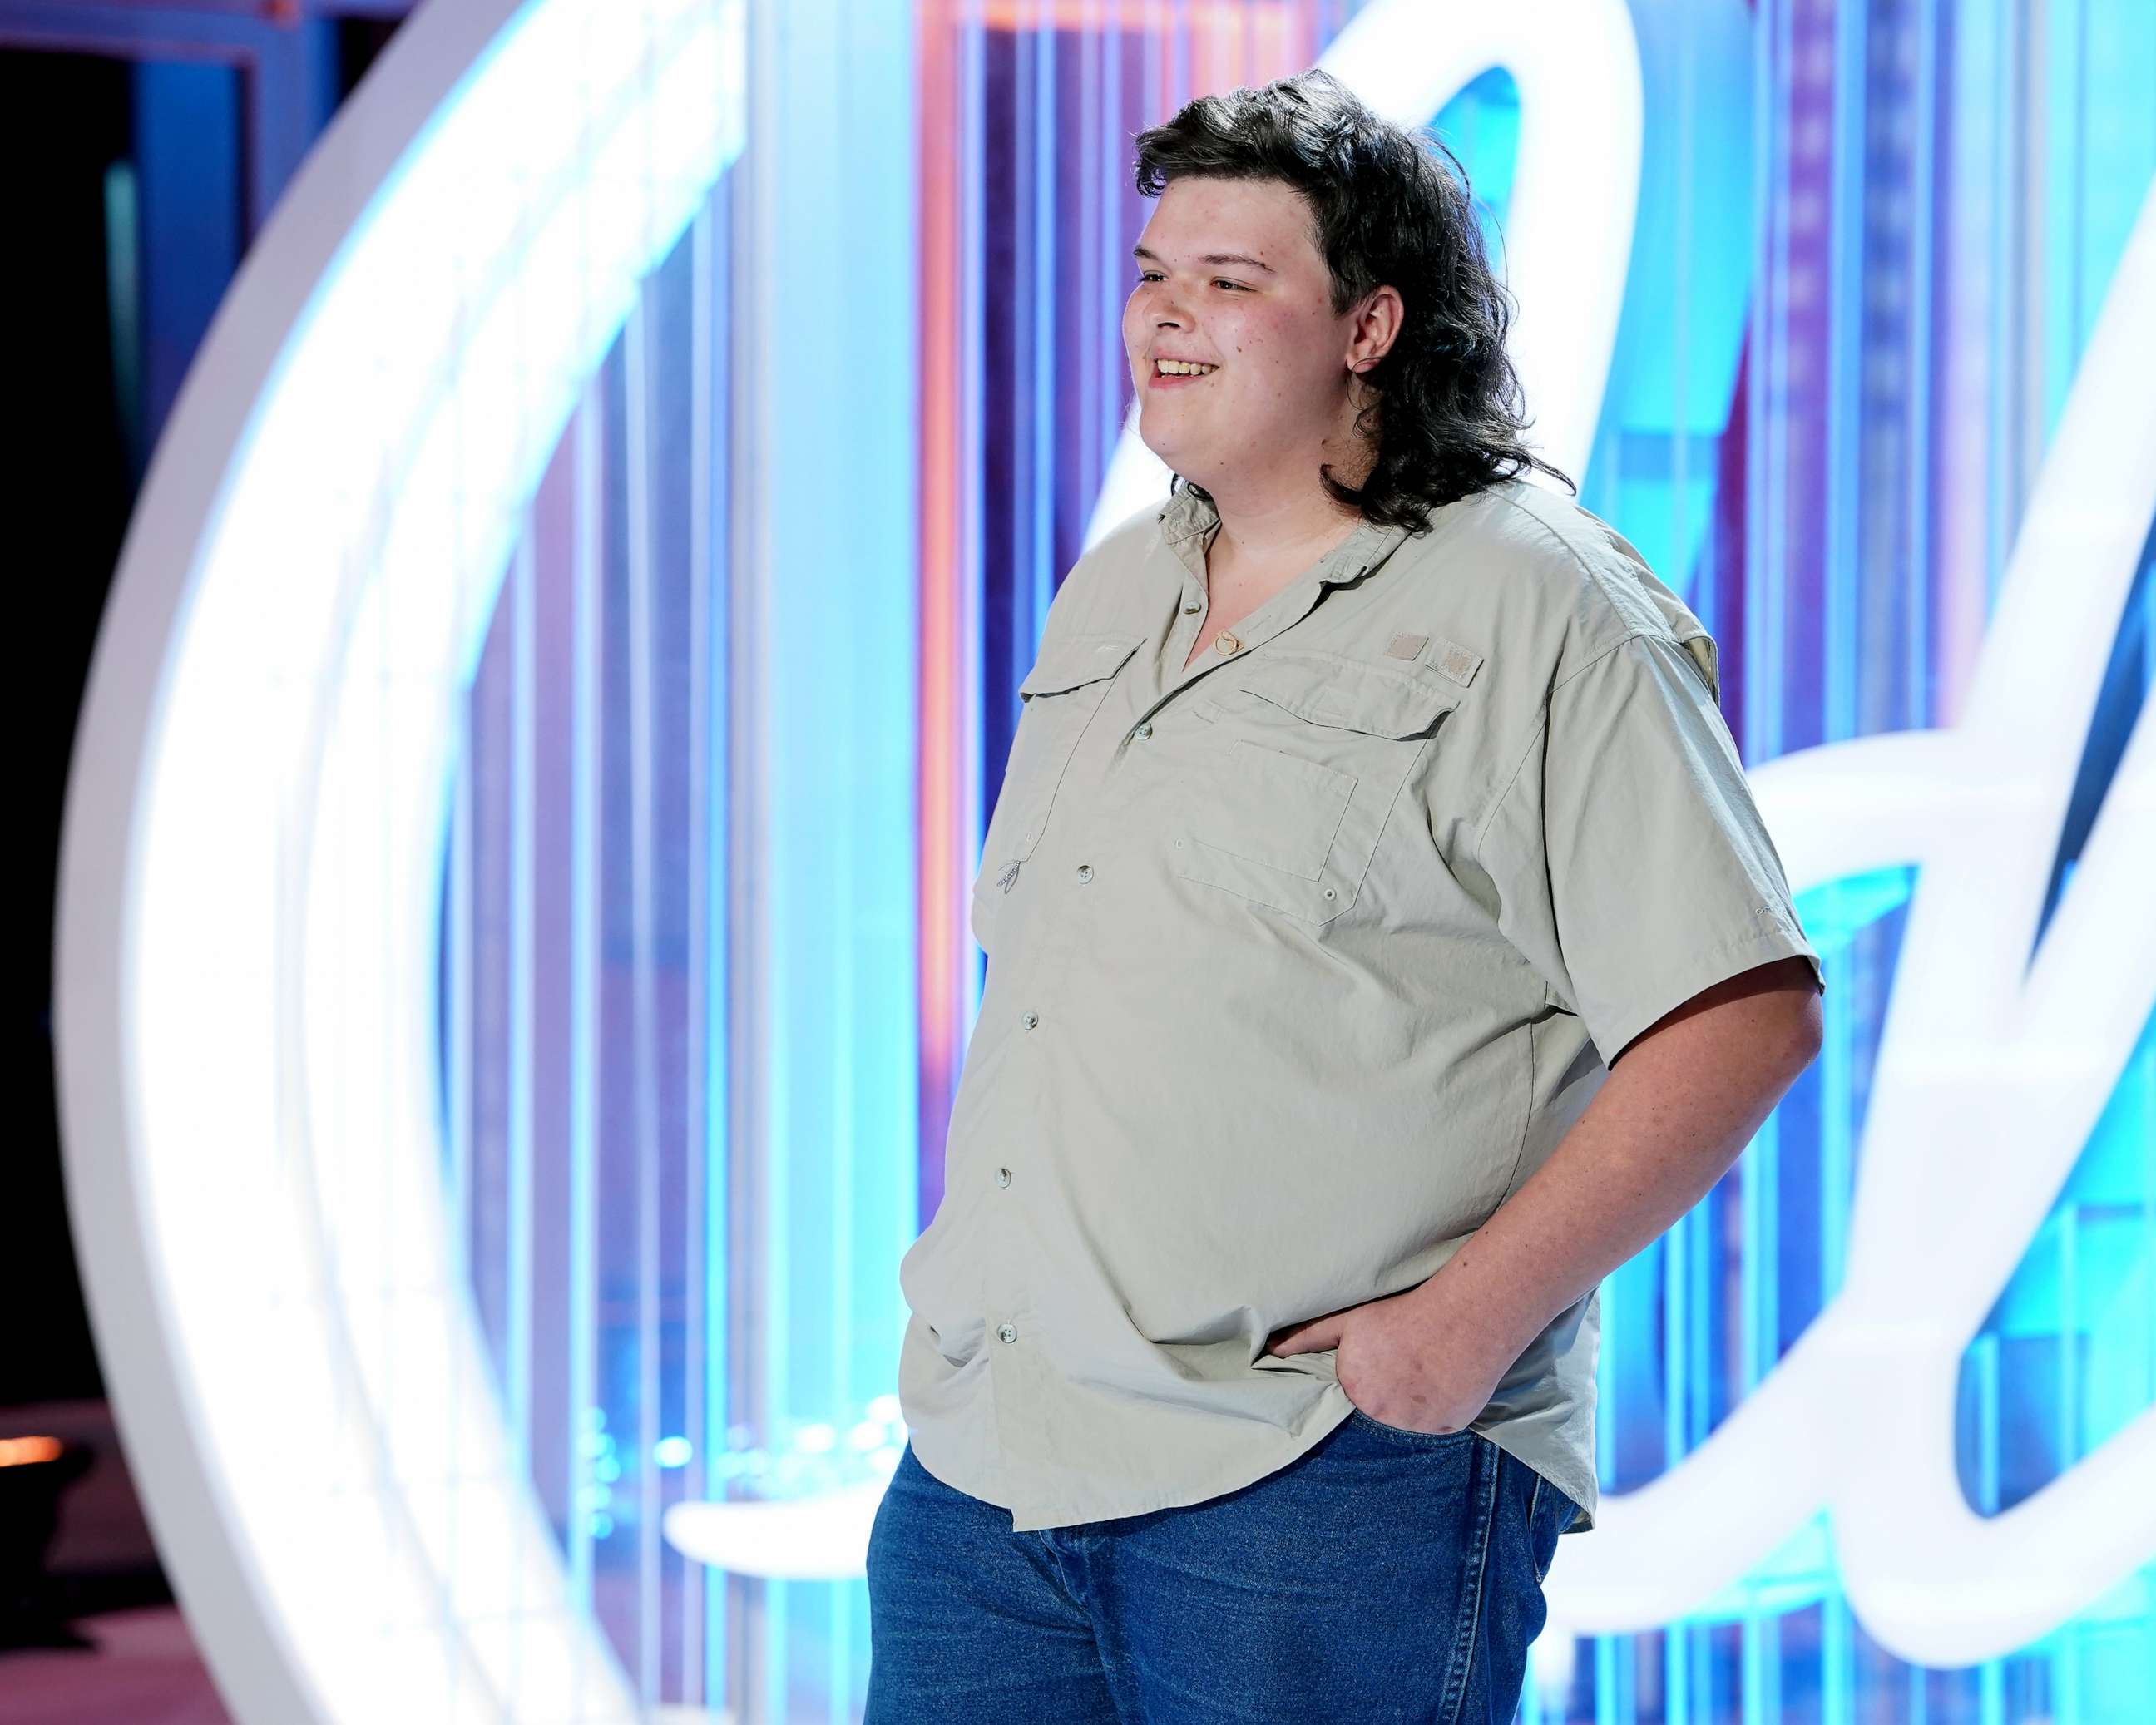 PHOTO: Trey Louis auditions for "American Idol."